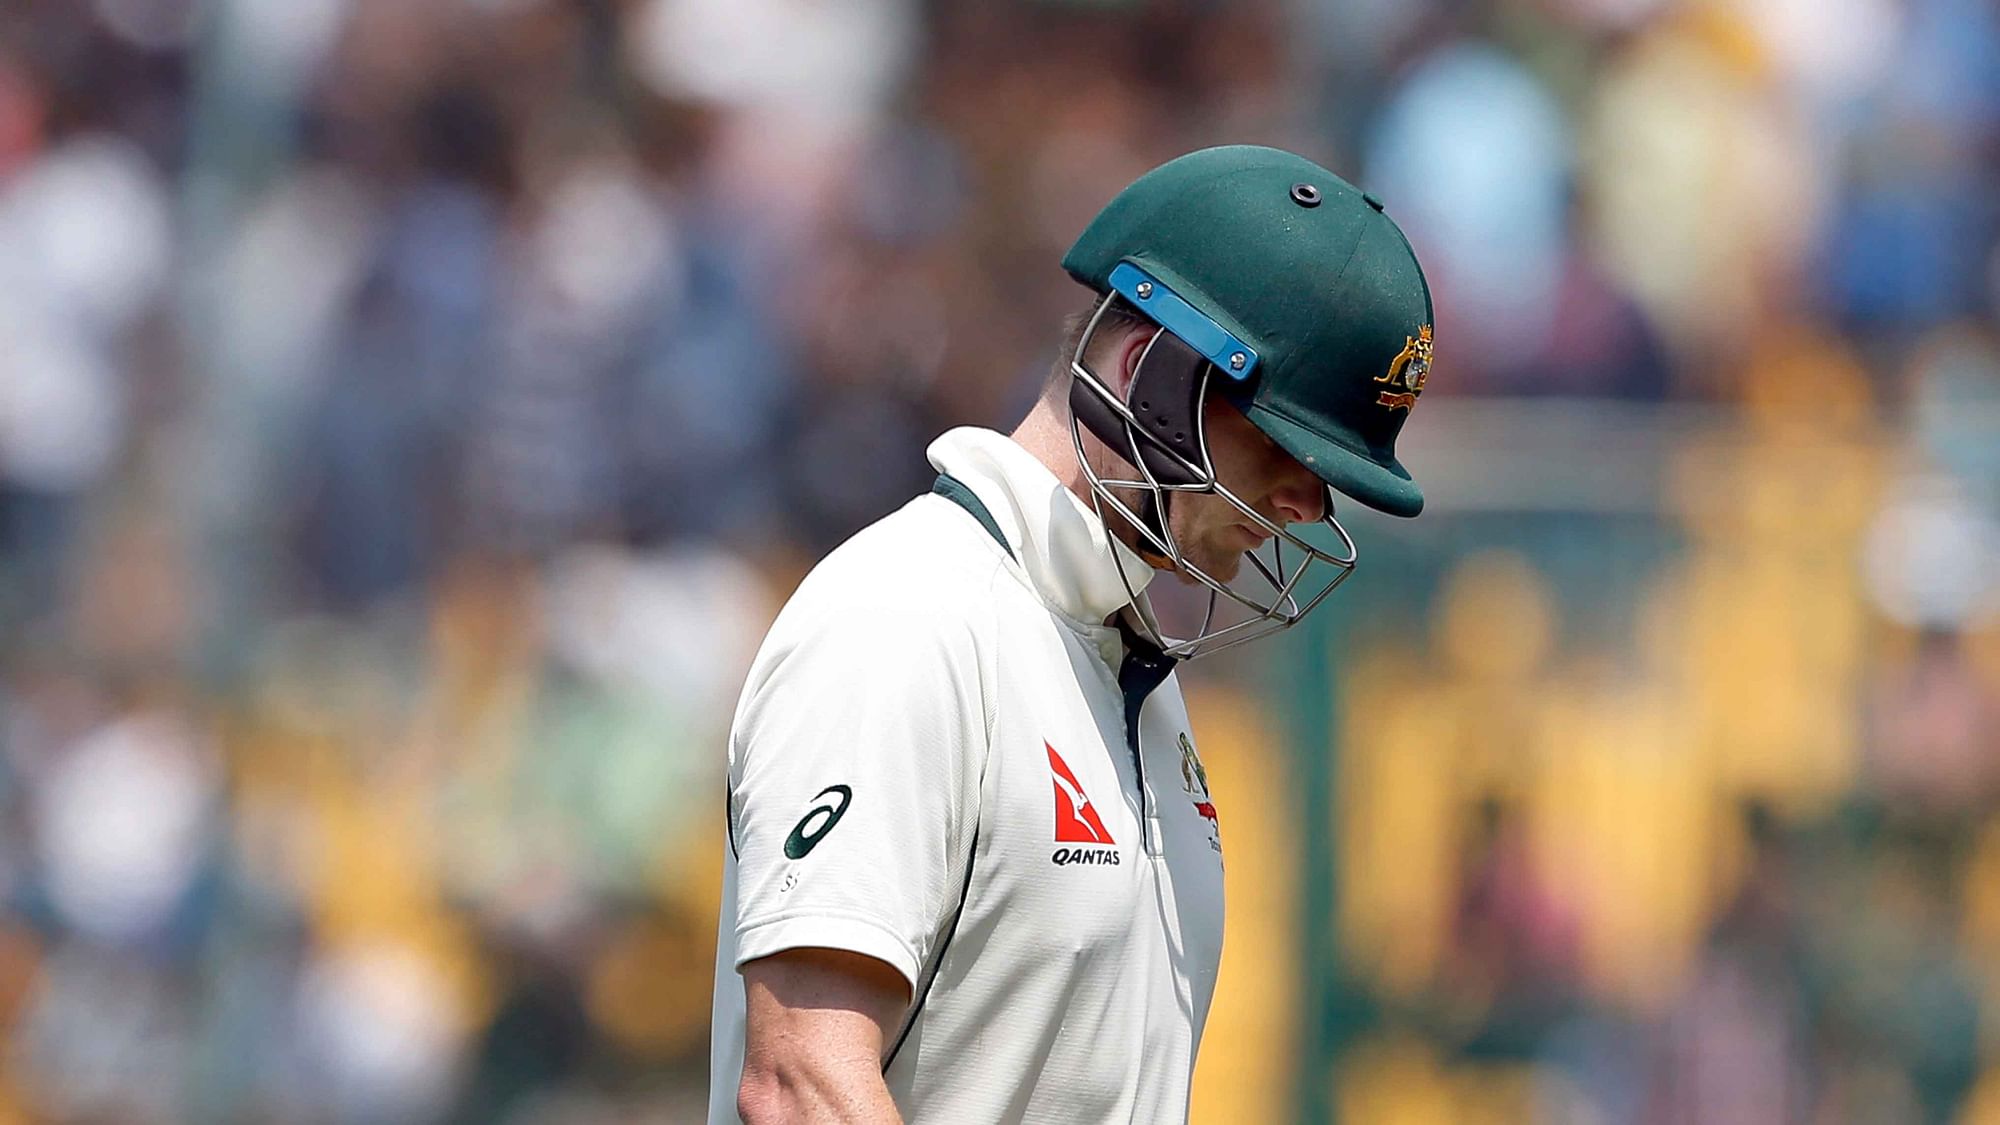 Steve Smith walks back to the pavilion after being given lbw off Umesh Yadav. (Photo: AP)